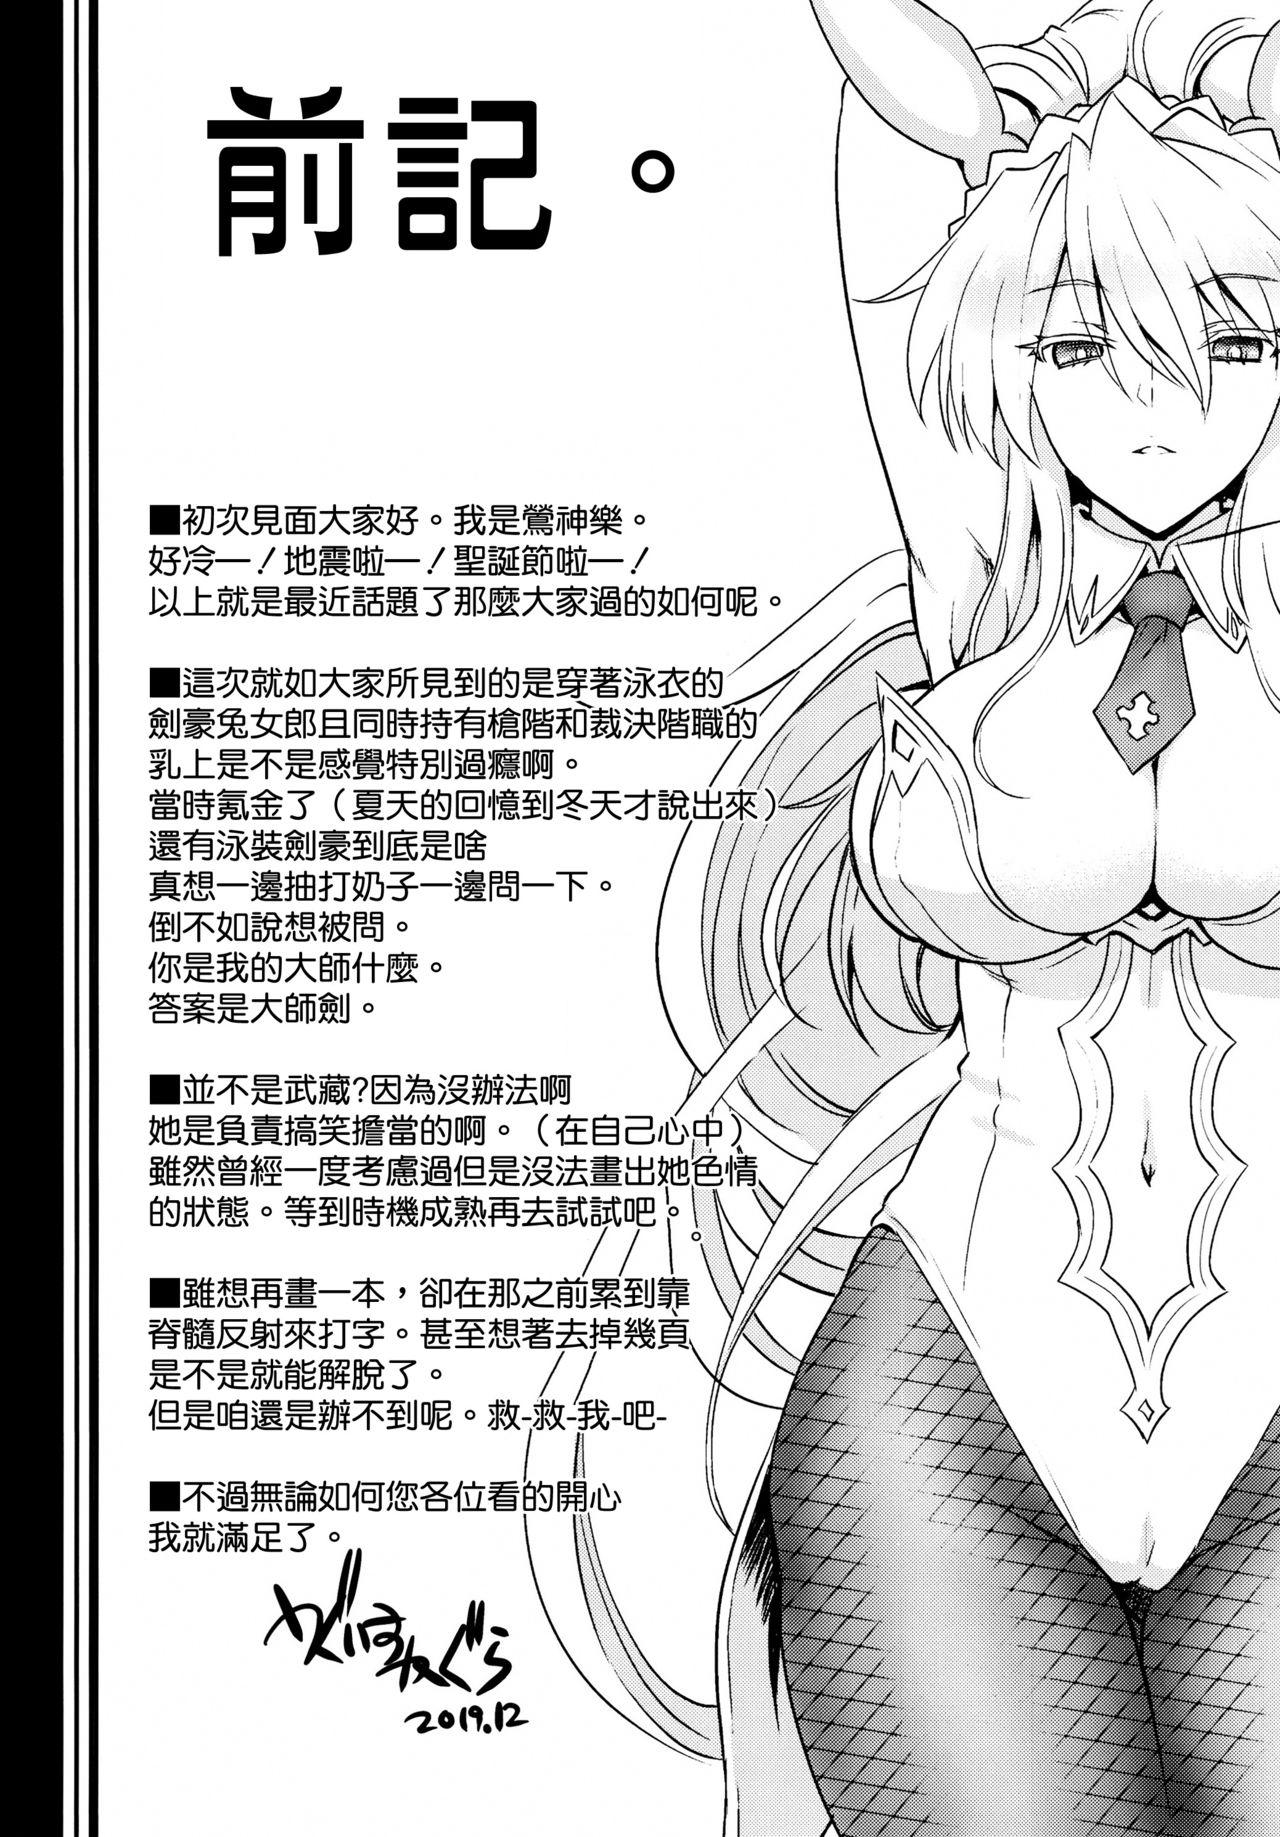 Free Fucking Place your bets please - Fate grand order Free Amateur Porn - Page 4